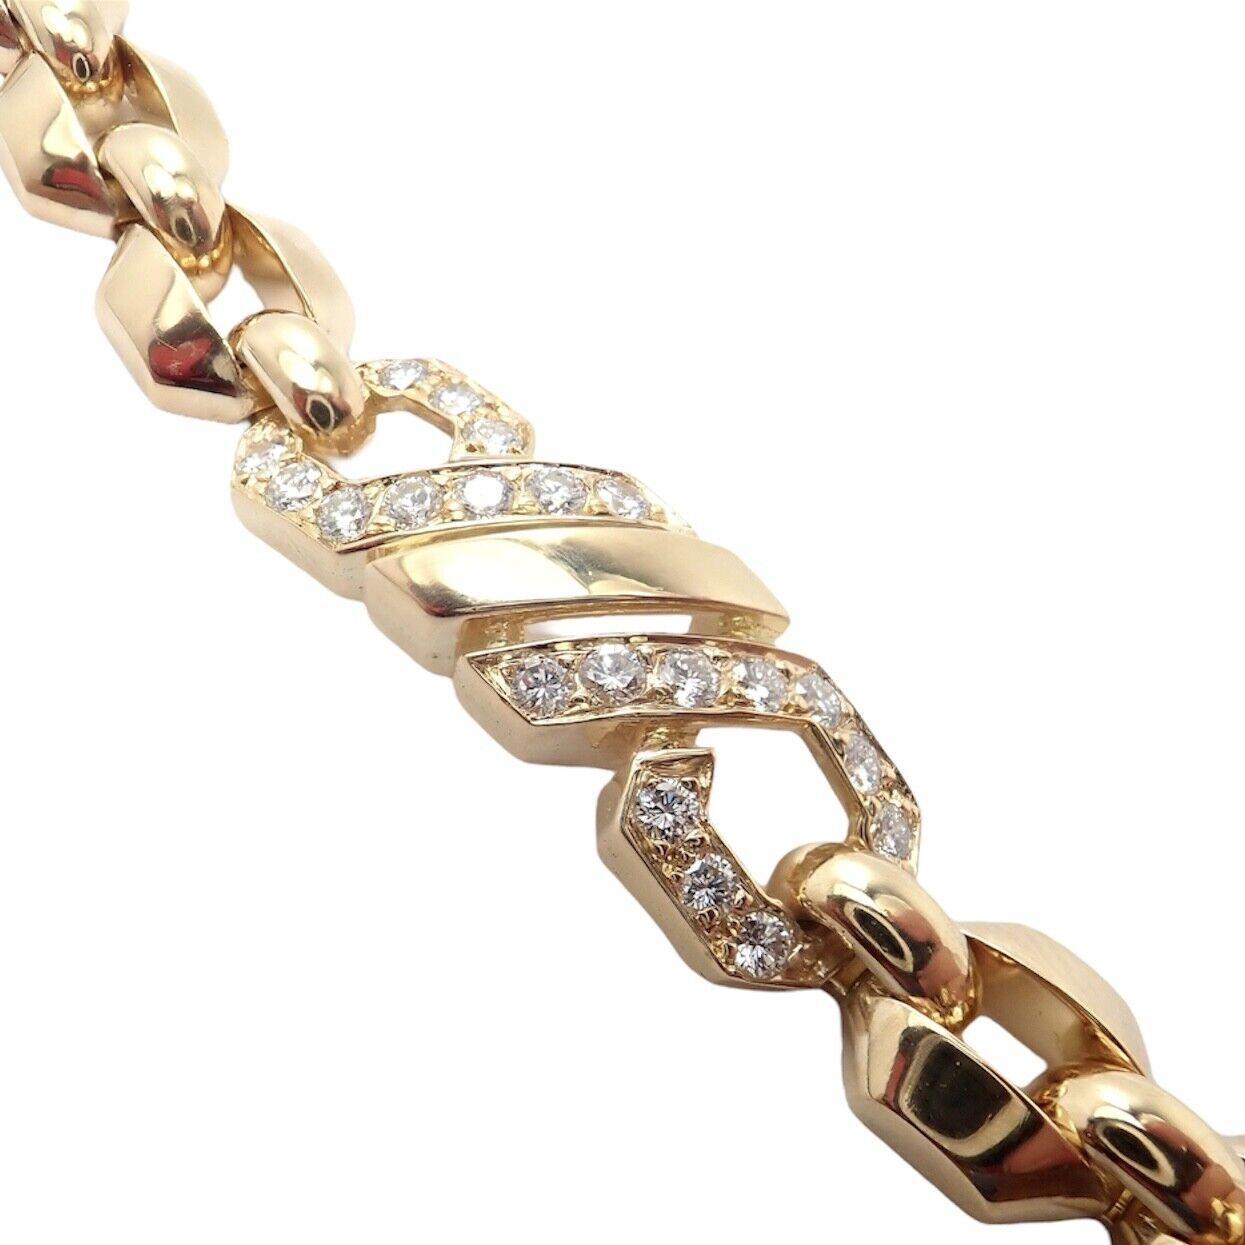 18k Yellow Gold Fox Trot Diamond Bracelet by Cartier from the 1980's. 
With 40 round brilliant cut diamonds VVS1 clarity, E color total weight approximately 1.00ct
This stunning bracelet comes with a Cartier box.
Details: 
Weight: 35.5 grams